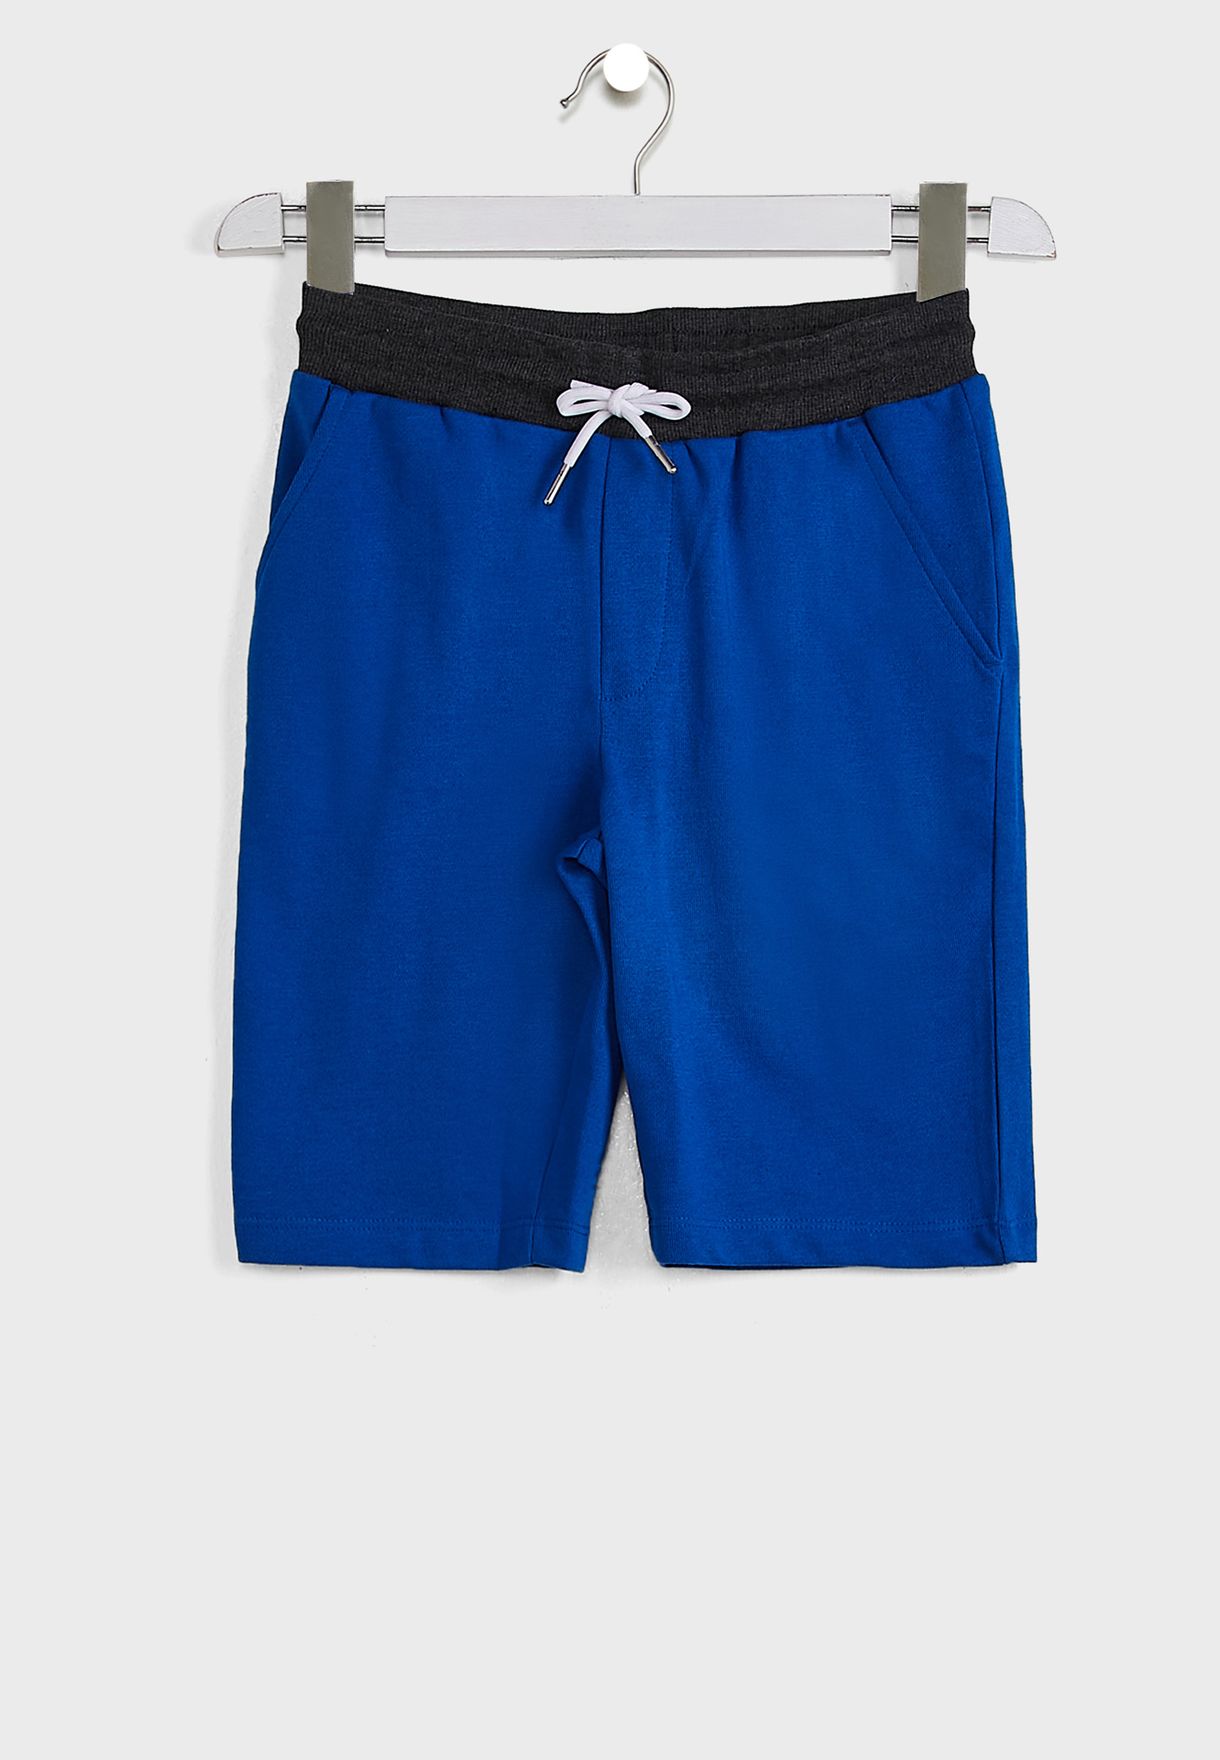 Youth 2 Pack Shorts